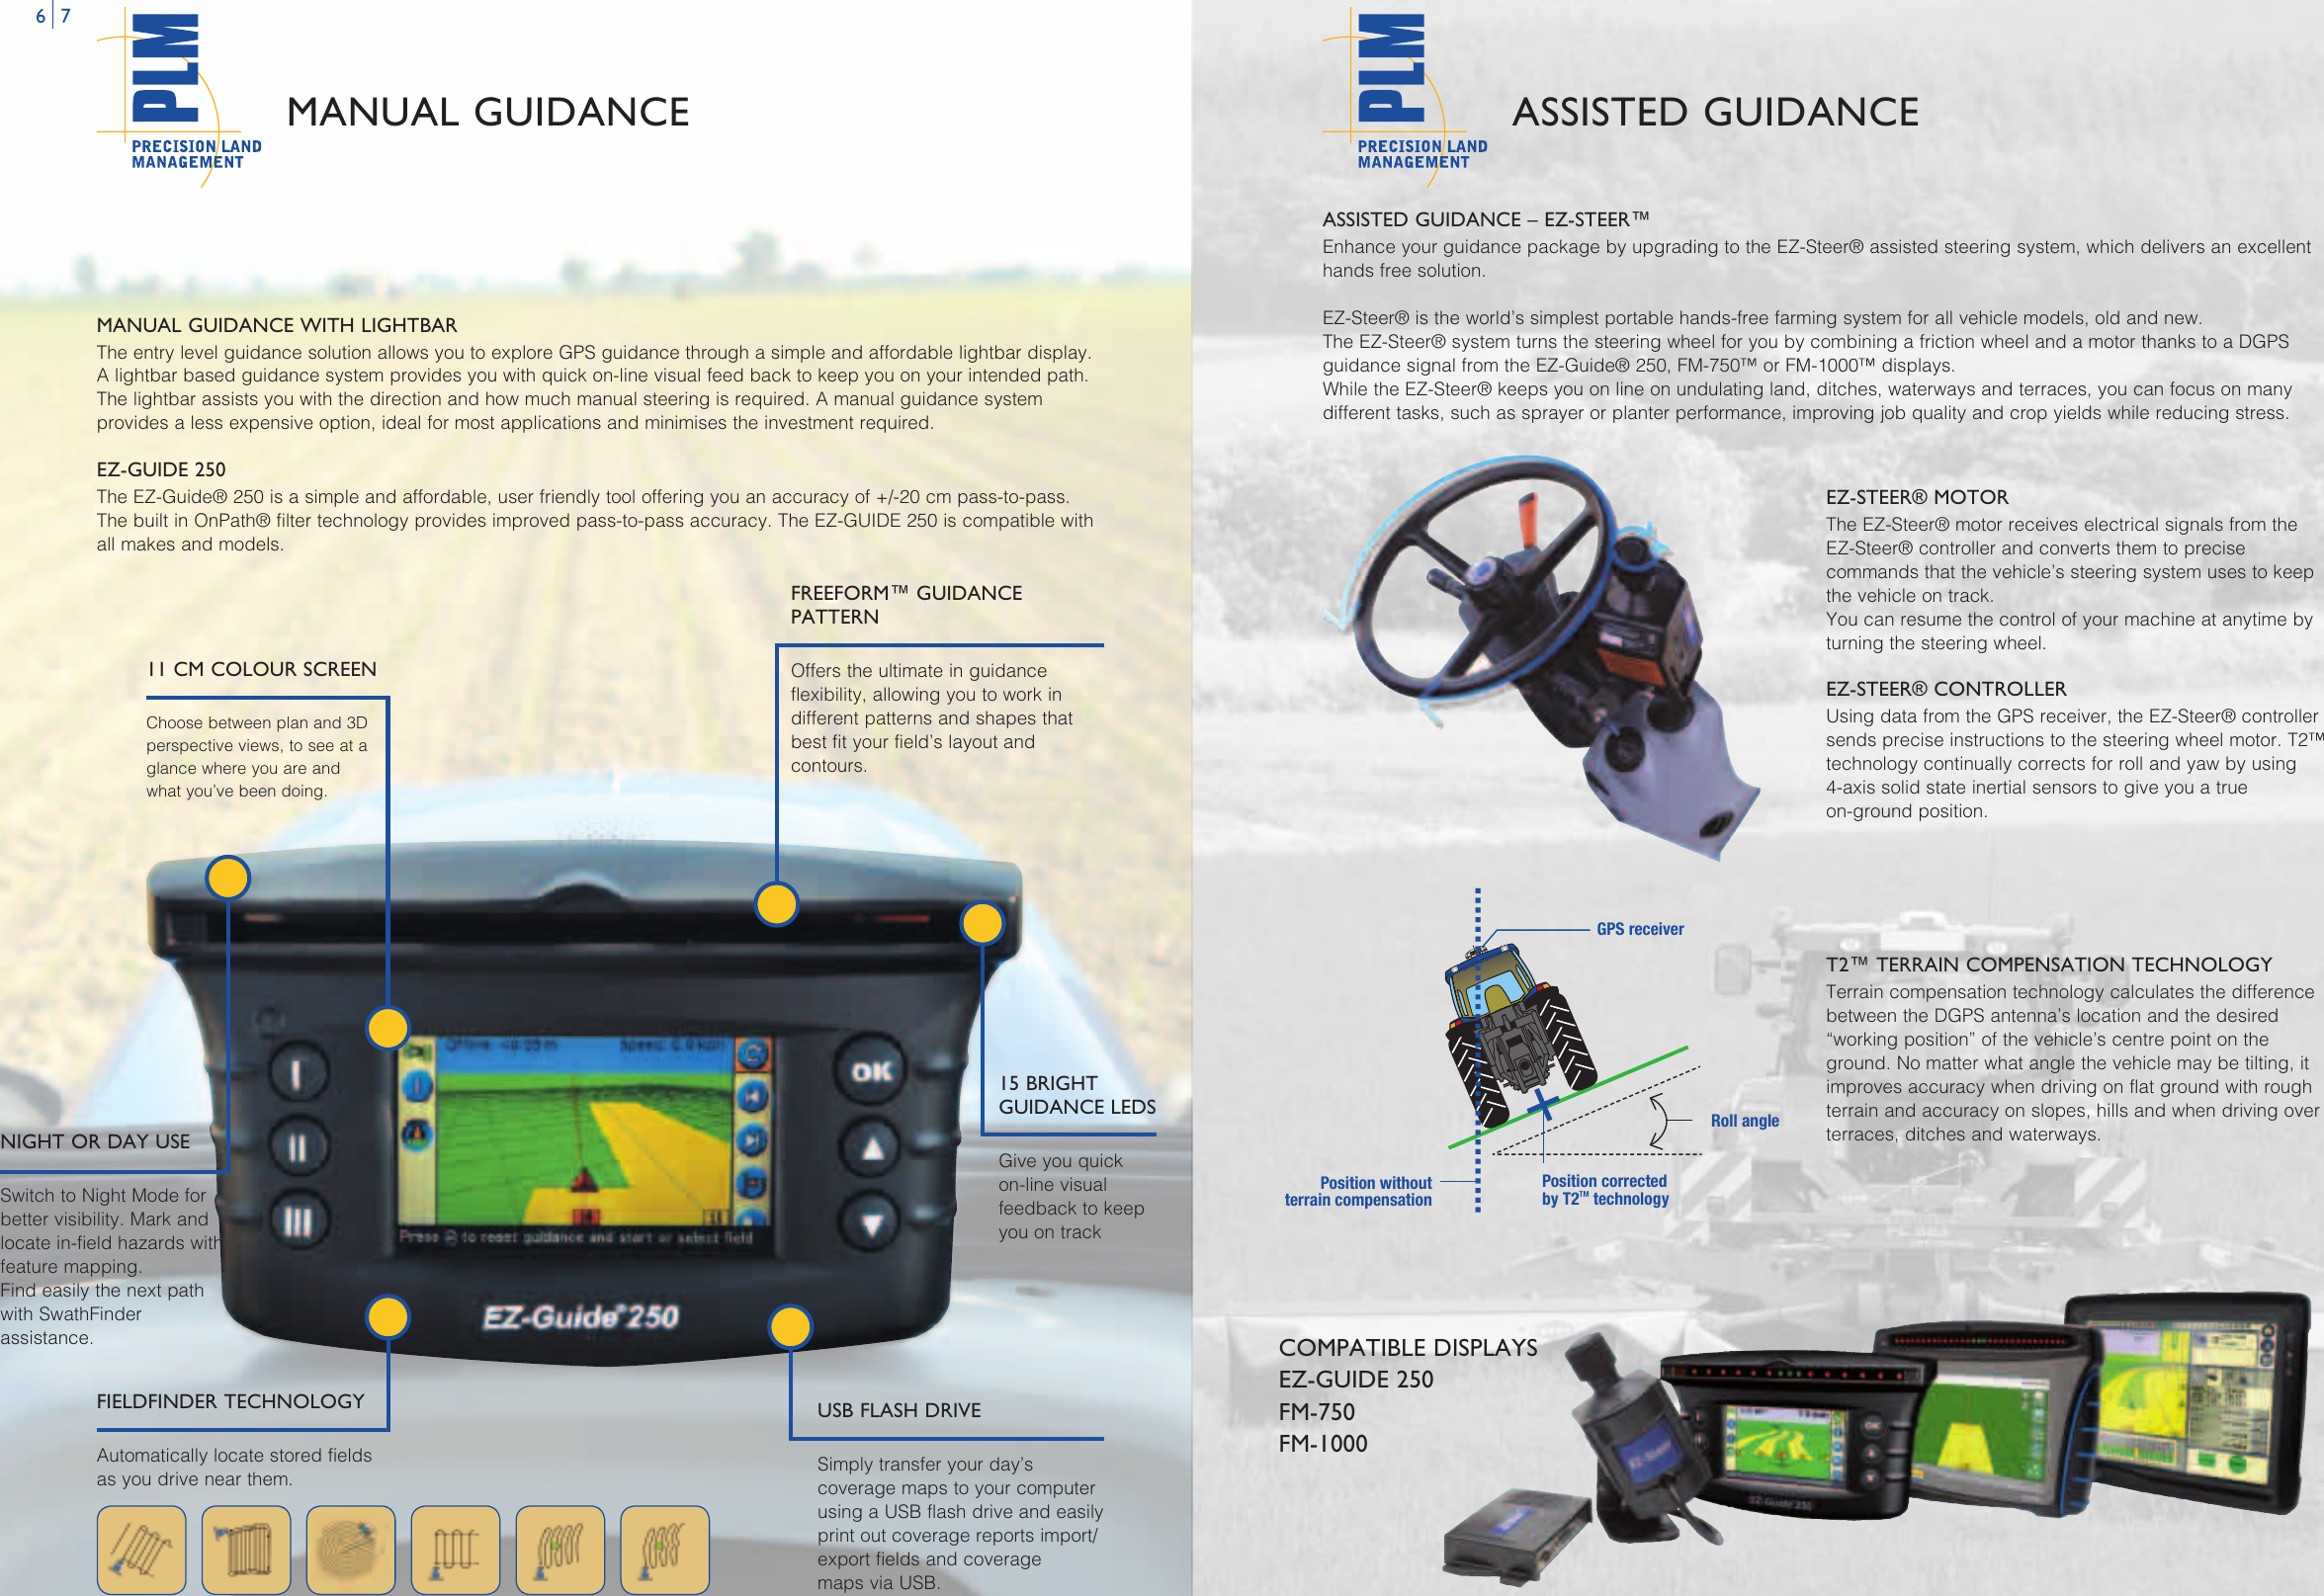 Page 4 of 11 - New-Holland New-Holland-Fm-1000-Users-Manual-  New-holland-fm-1000-users-manual